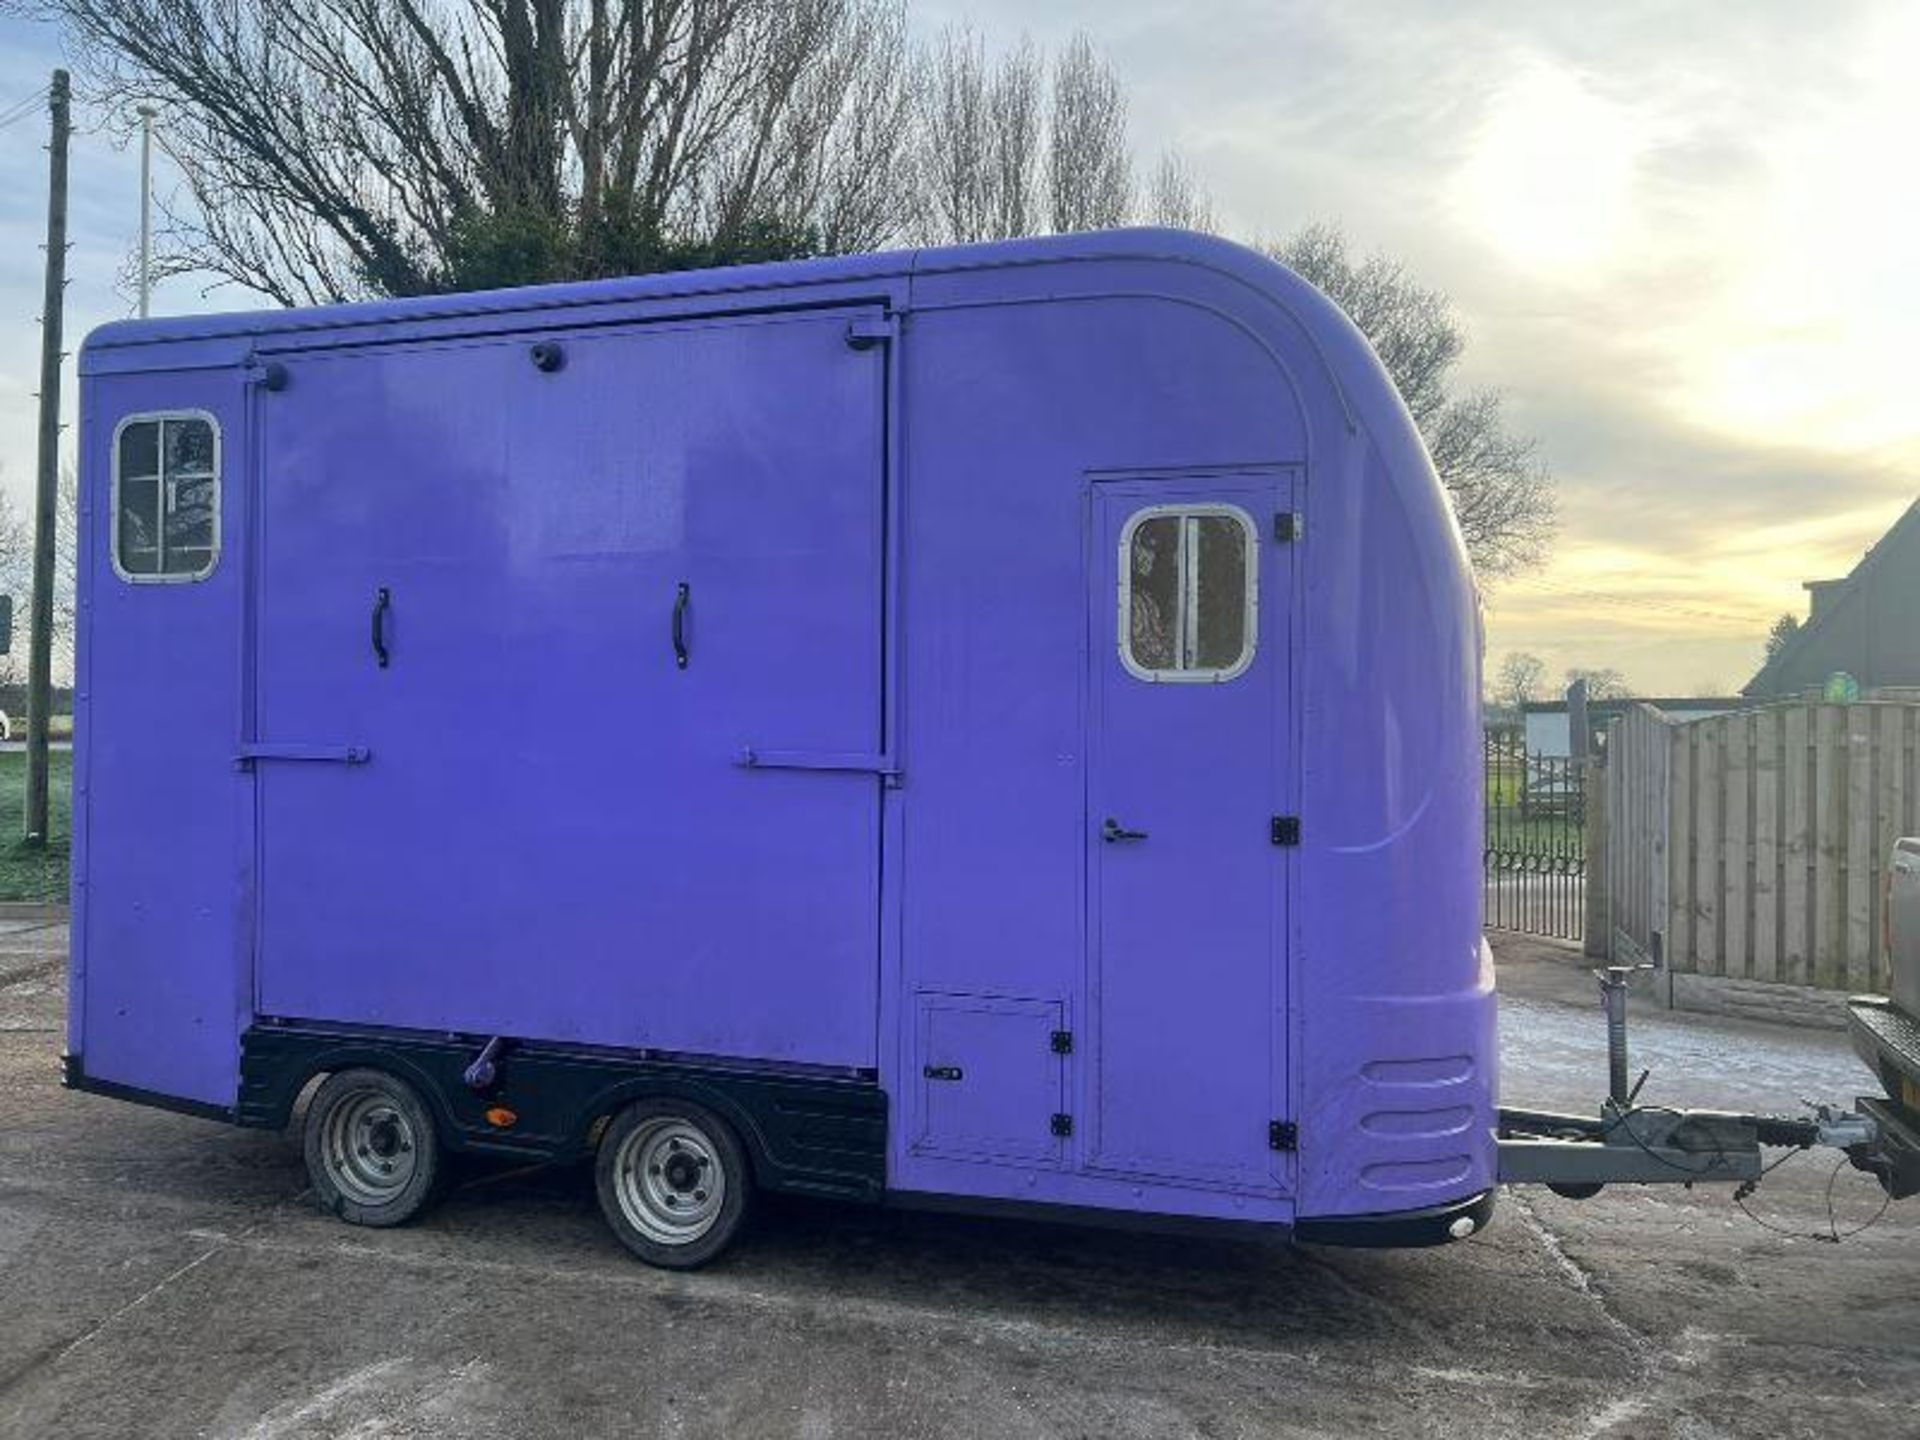 EQUITREK TWIN AXLE HORSE BOX *YEAR 2009* C/W LIVING AREA.